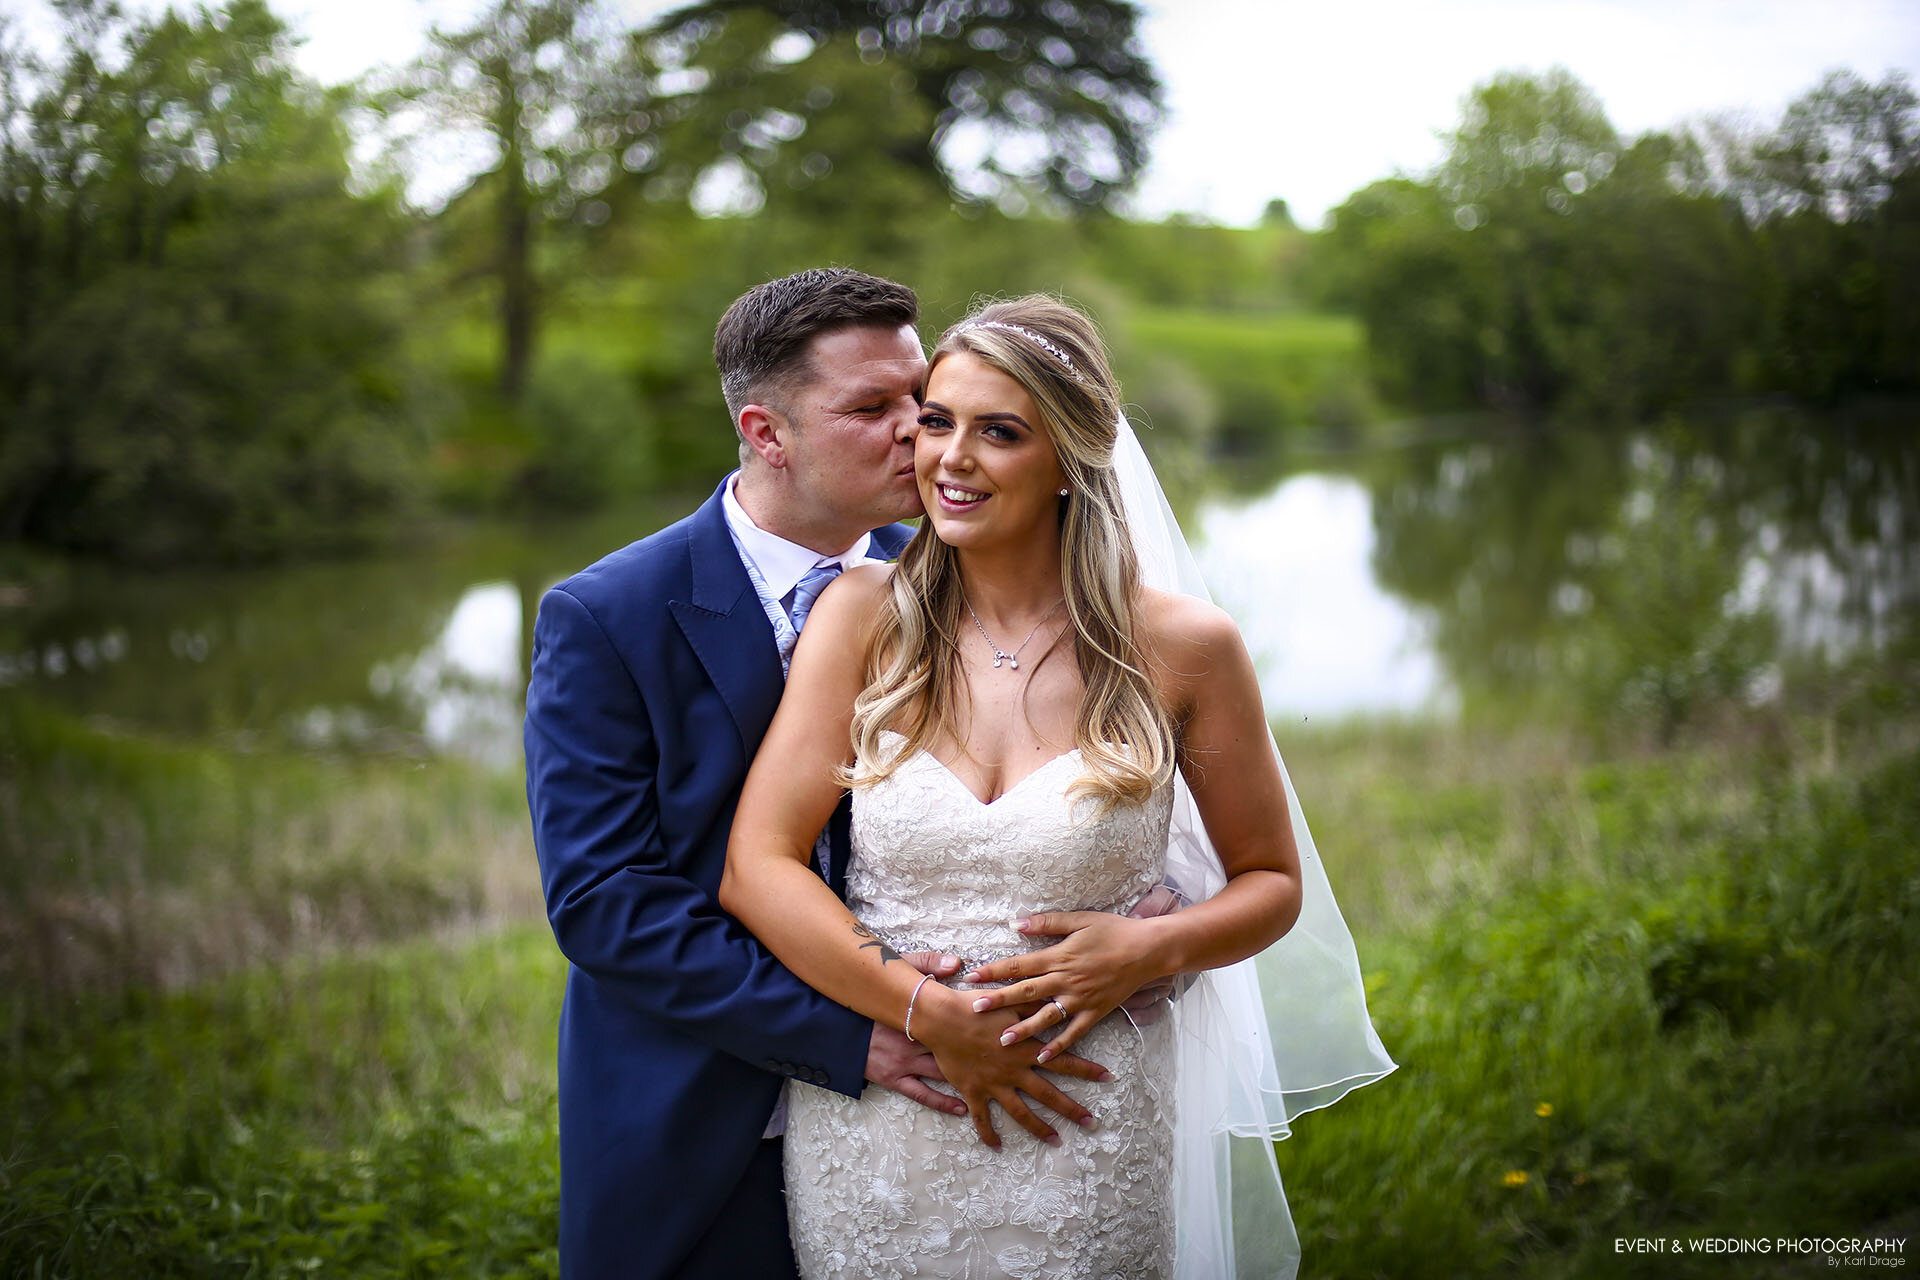 A groom gives his new wife a peck on the cheek near the lake by Fawsley Hall on their wedding day